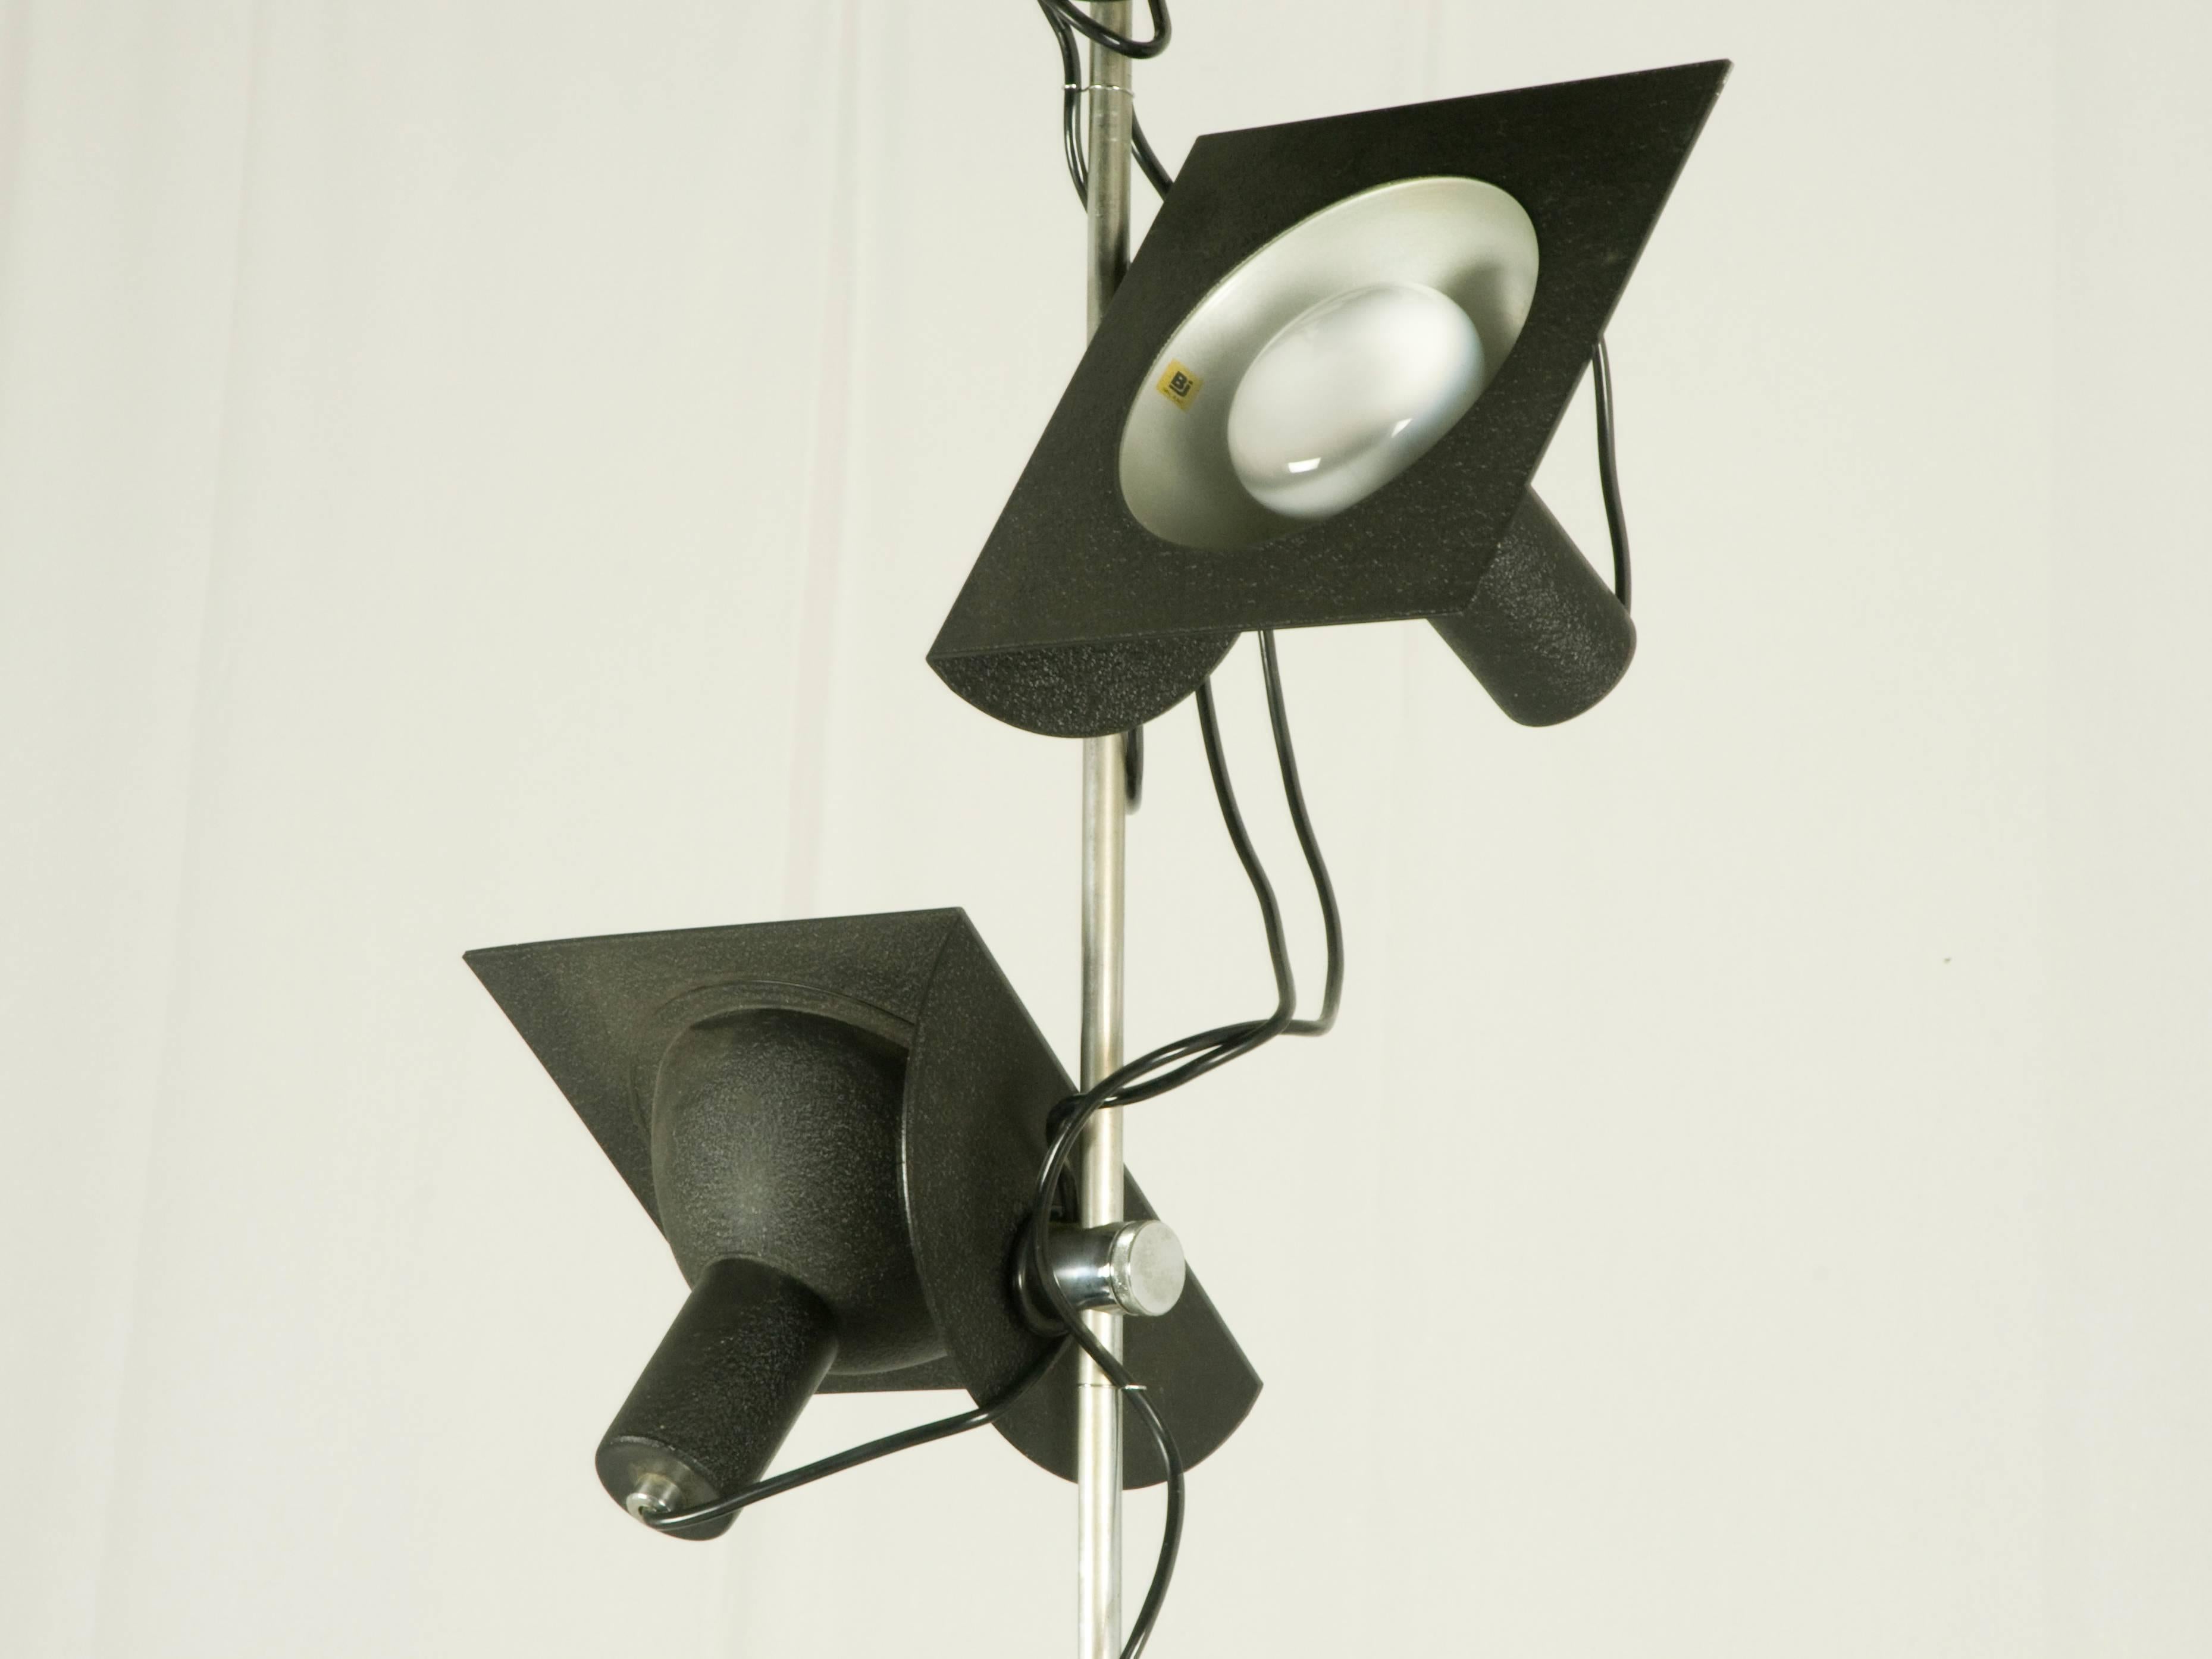 Space Age Black and Chromed Four-Light, 1970s Adjustable Pendant Lamp by BJ Milano Design For Sale